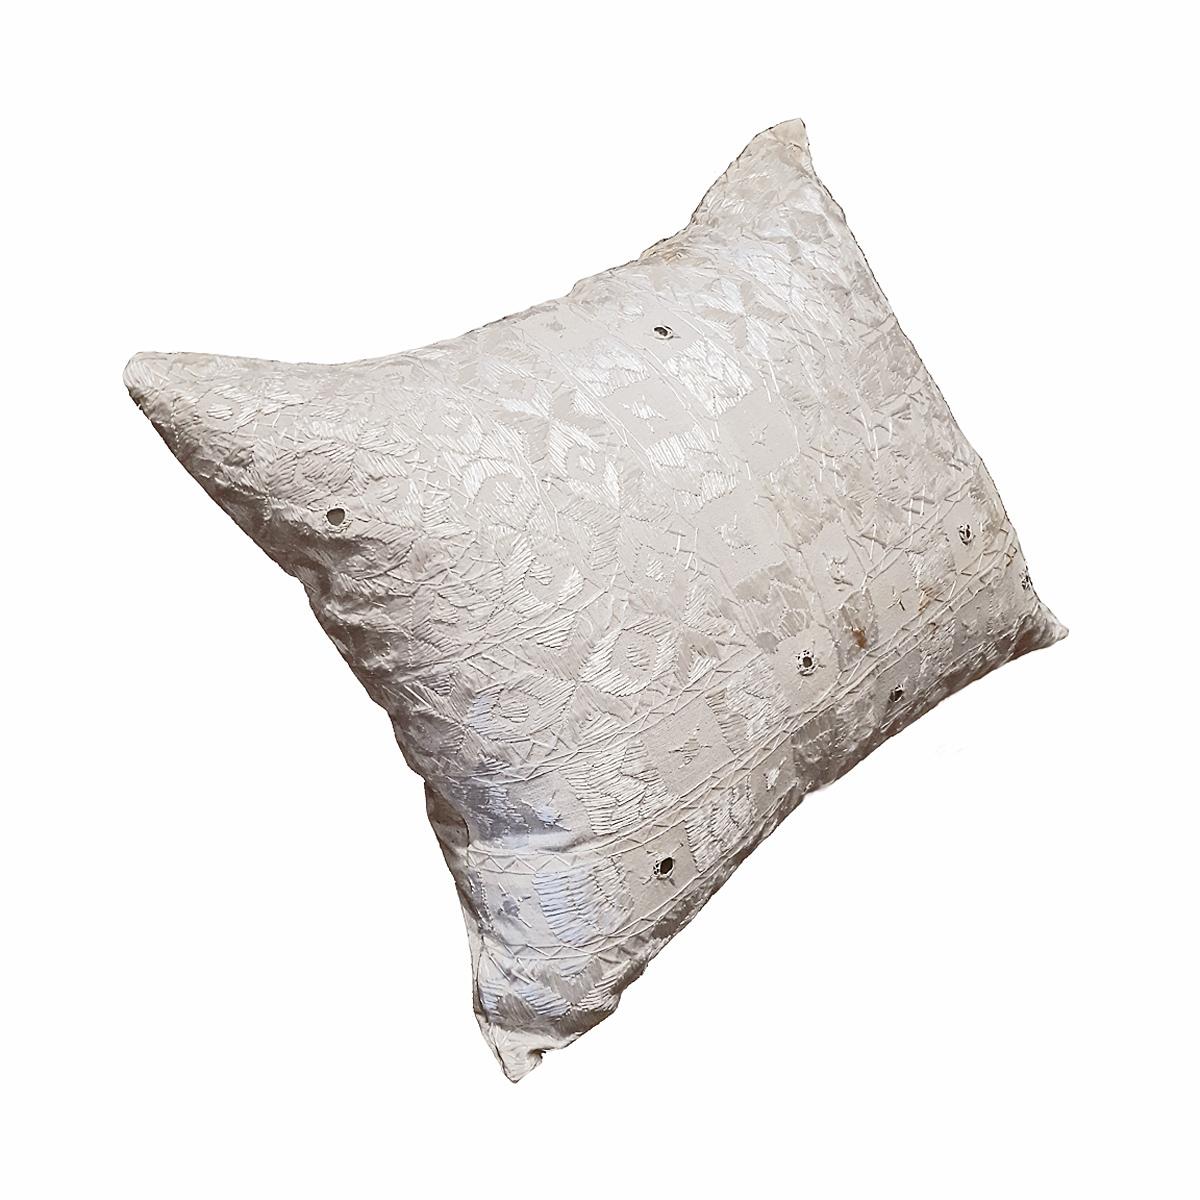 An Indian silk pillow, hand-crafted and embroidered in silk, tone on tone. 

The front is intricately embroidered with shiny silk and tiny mirrors. The back is satin silk, with square mother-of-pearl fastening buttons. 95/5 feather-down insert.